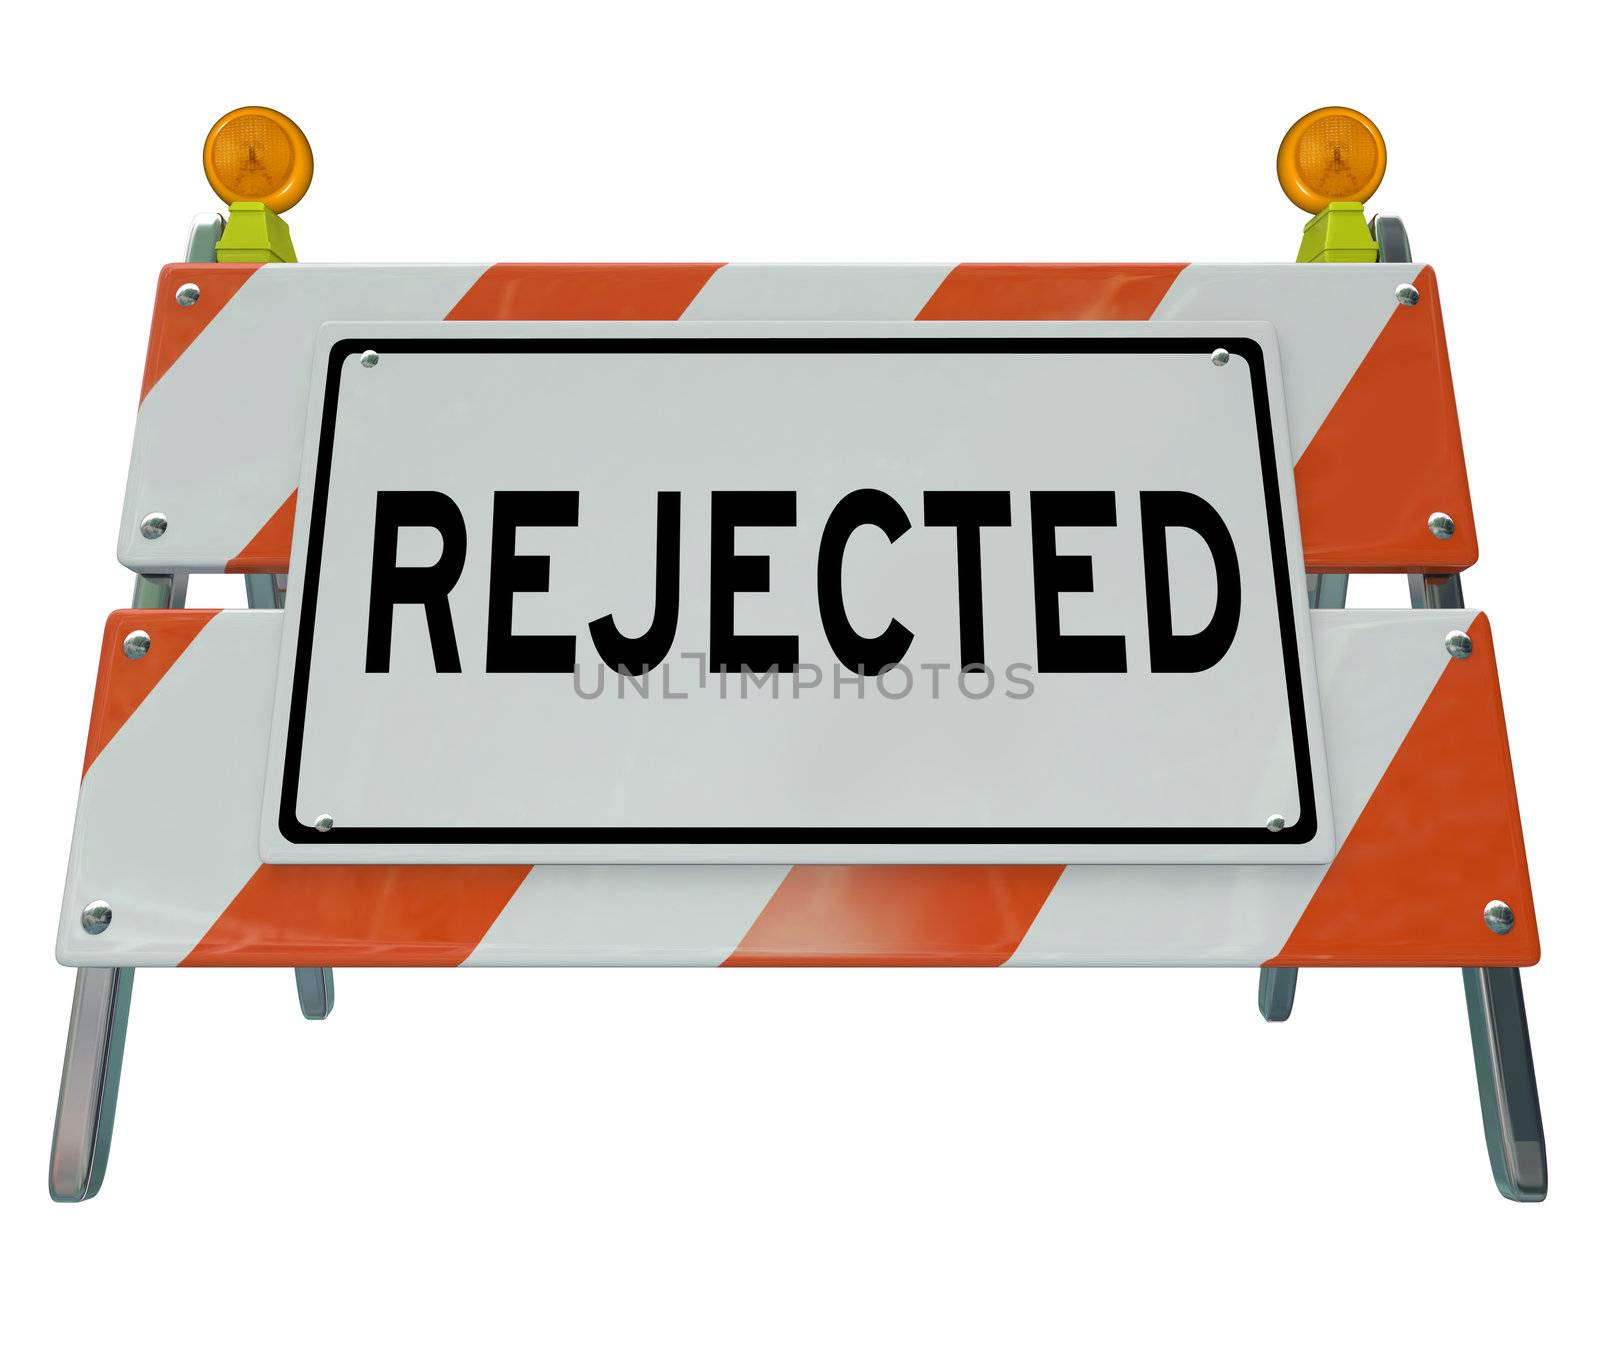 A road blockade or barrier with the word Rejected, communicated a negative message of denial, refusal or being turned down for something you wanted